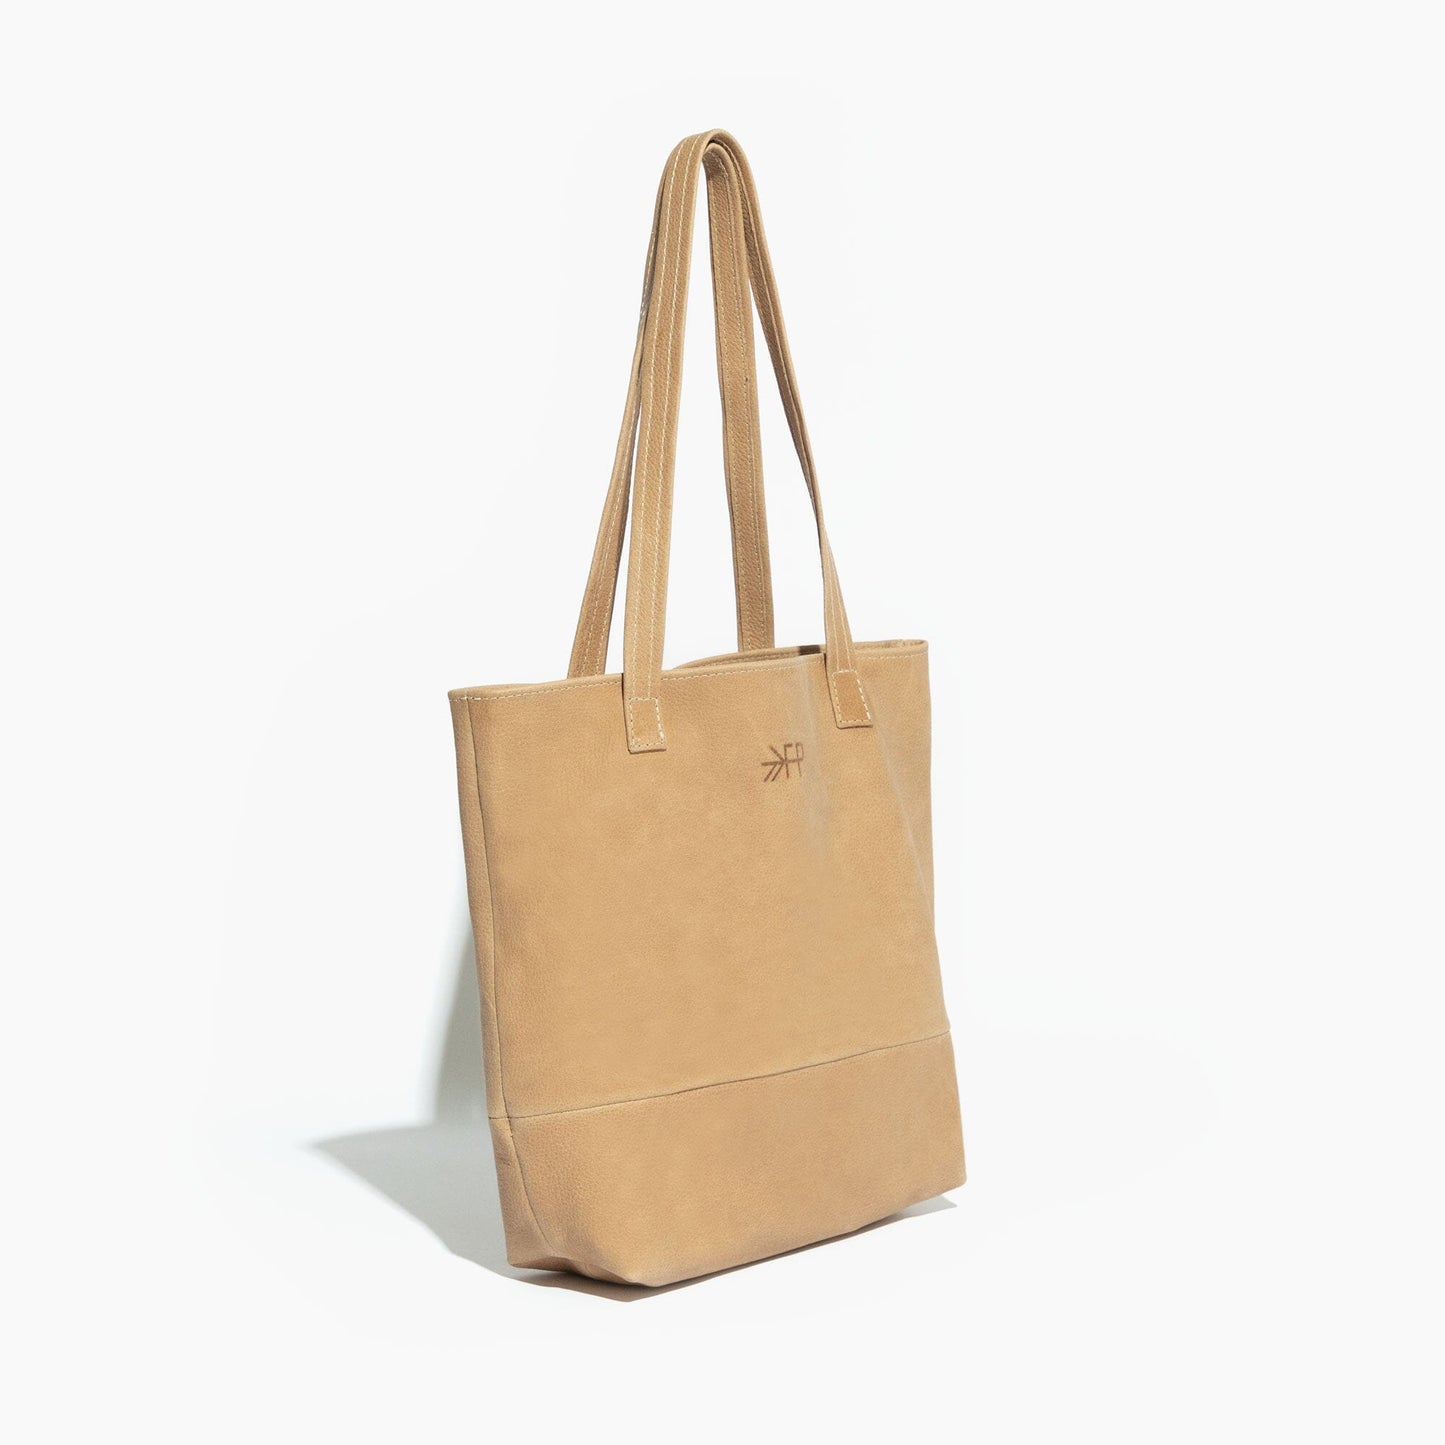 Weathered Brown Tote Leather Tote In House Bag 